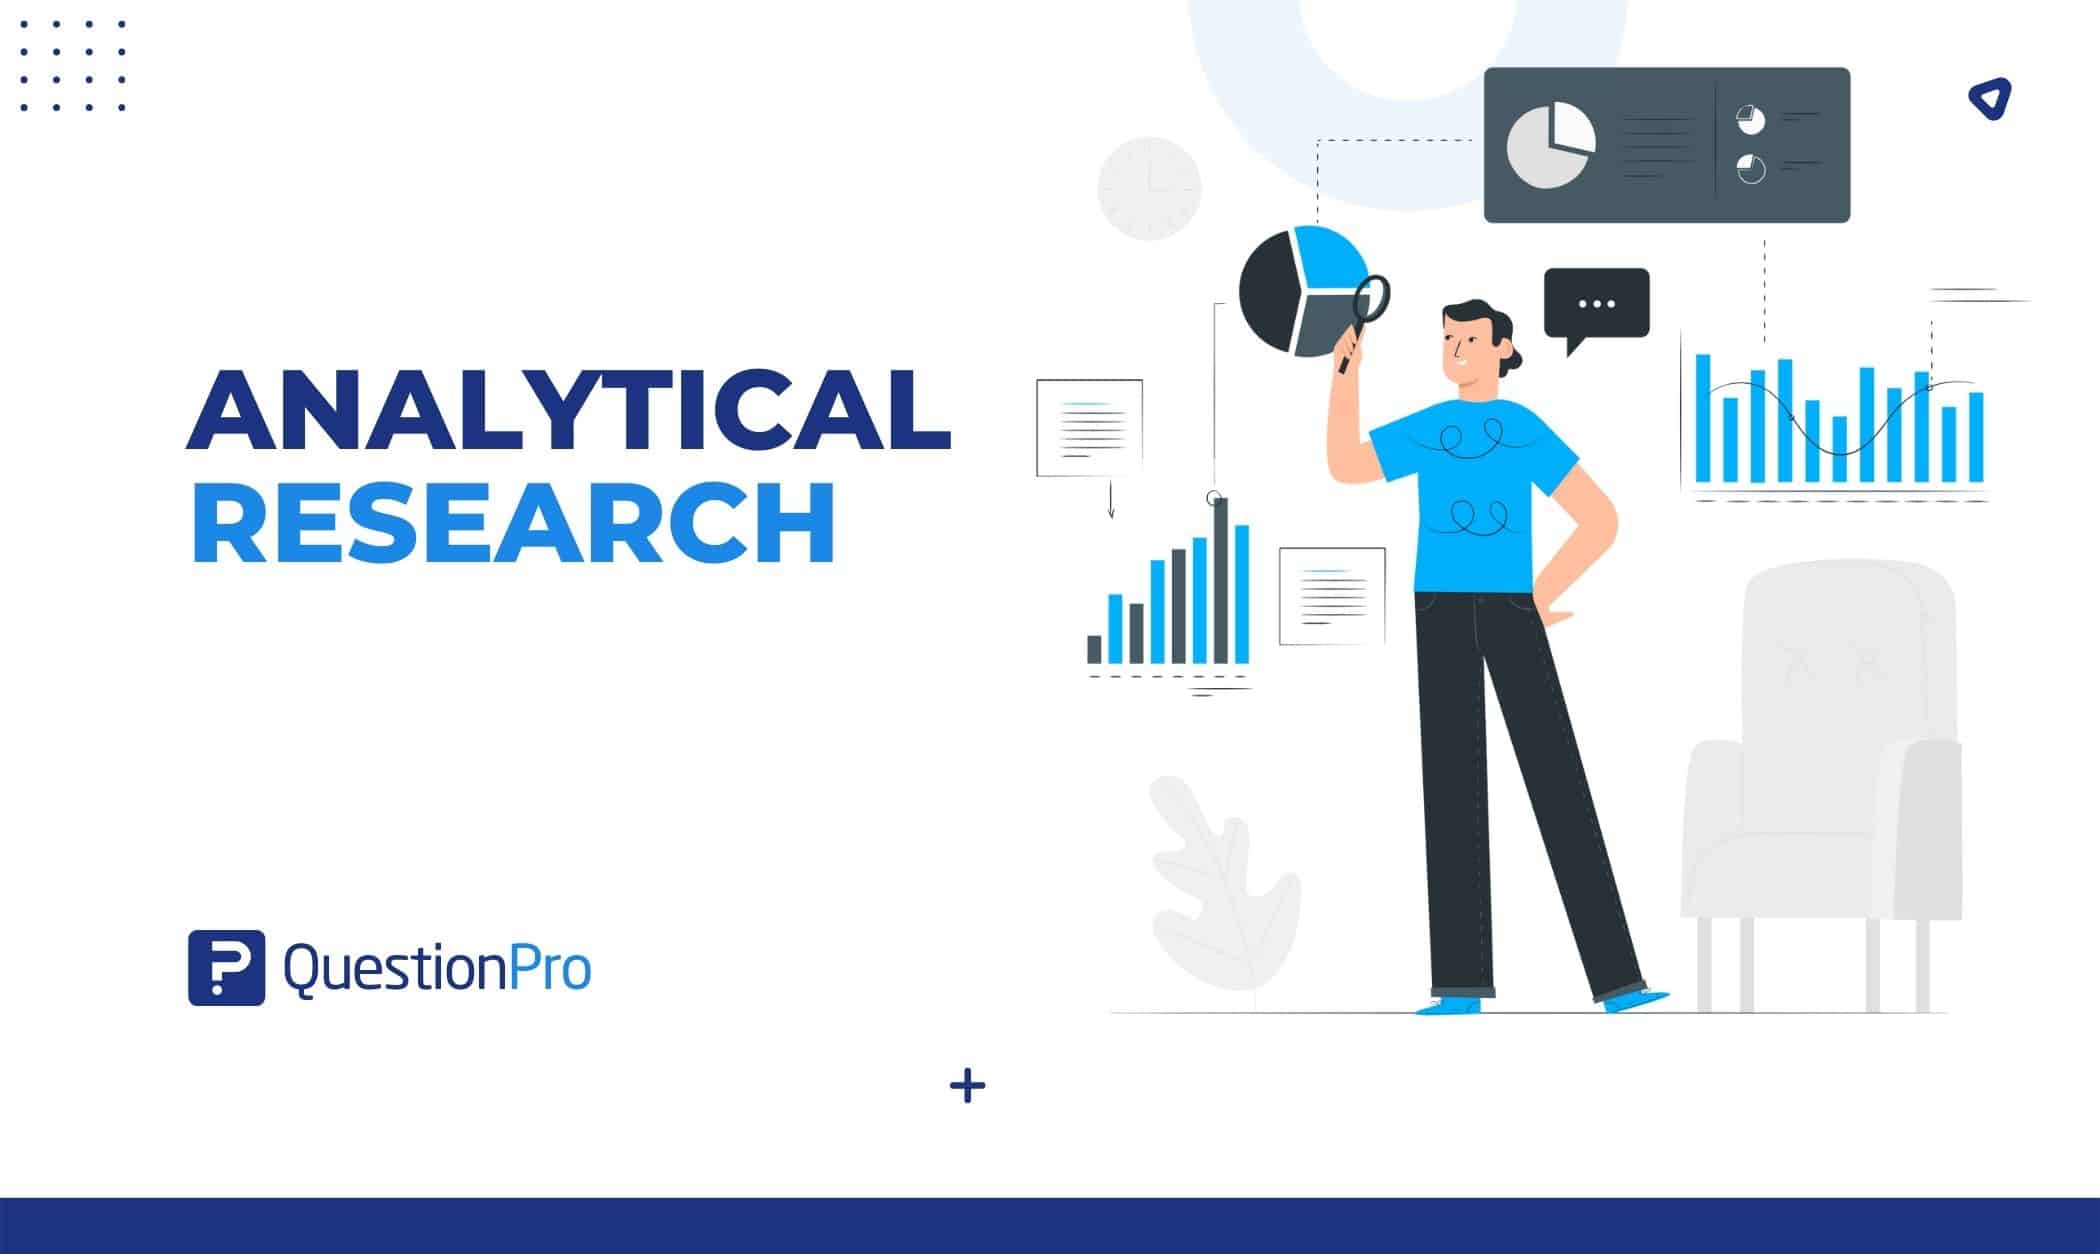 Analytical research is a type of research that requires critical thinking skills and the examination of relevant facts and information.